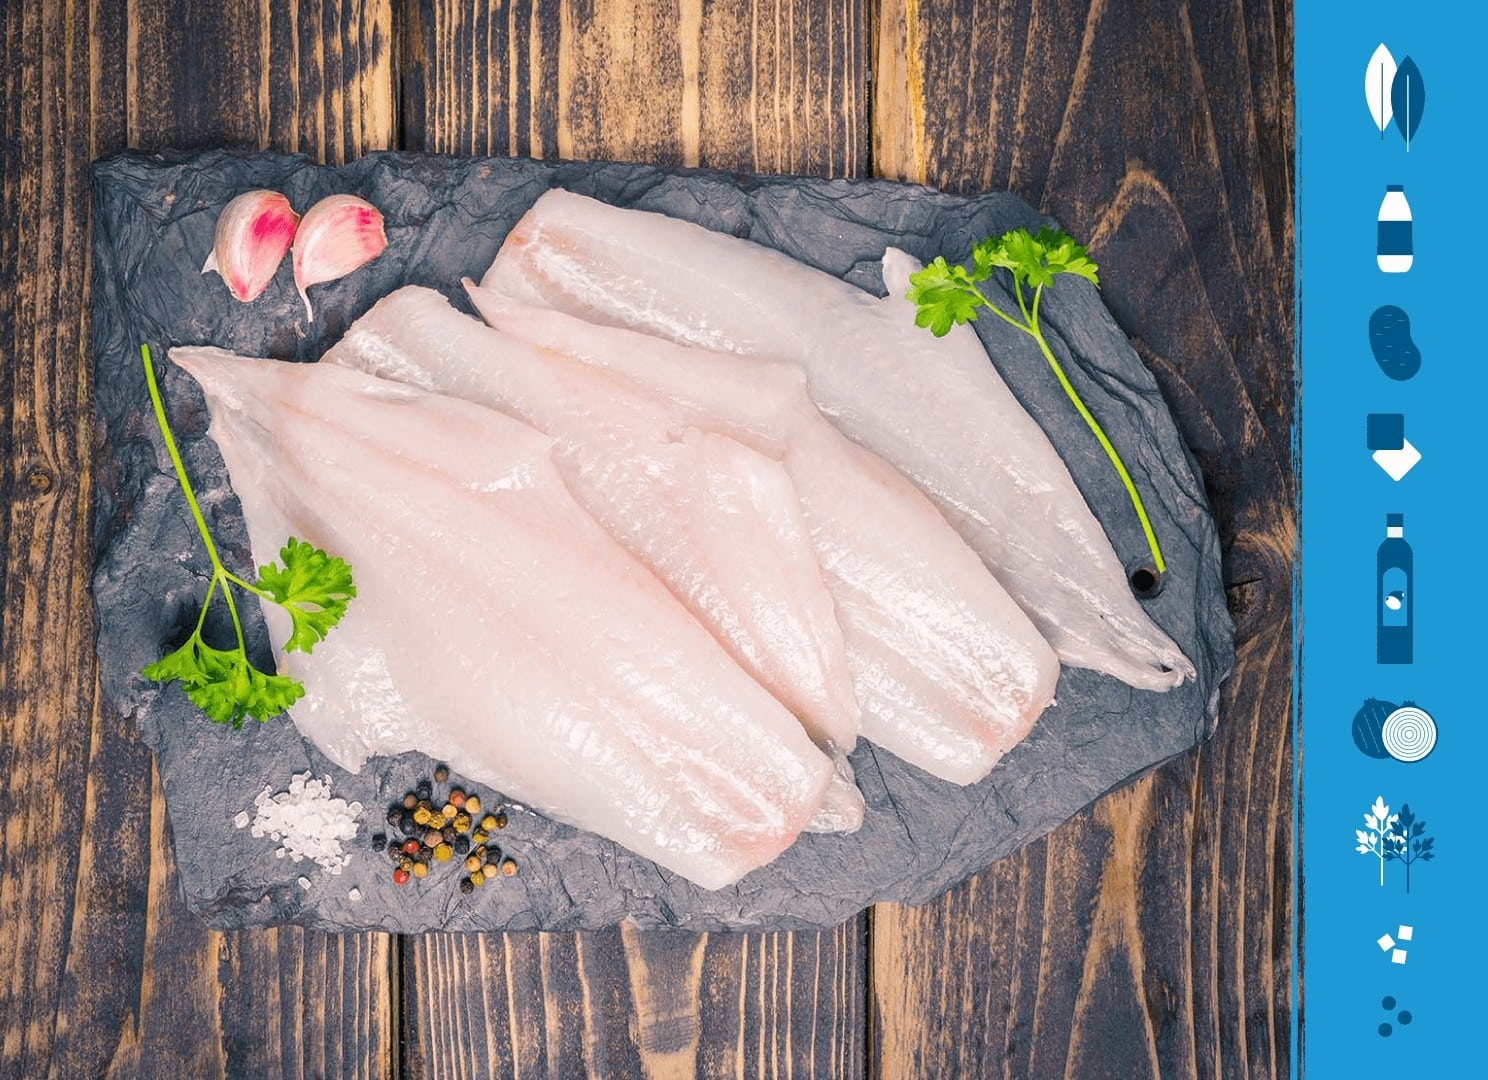 Haddock fillets on a slate background next to illustrations of the ingredients needed to make Cullen Skink